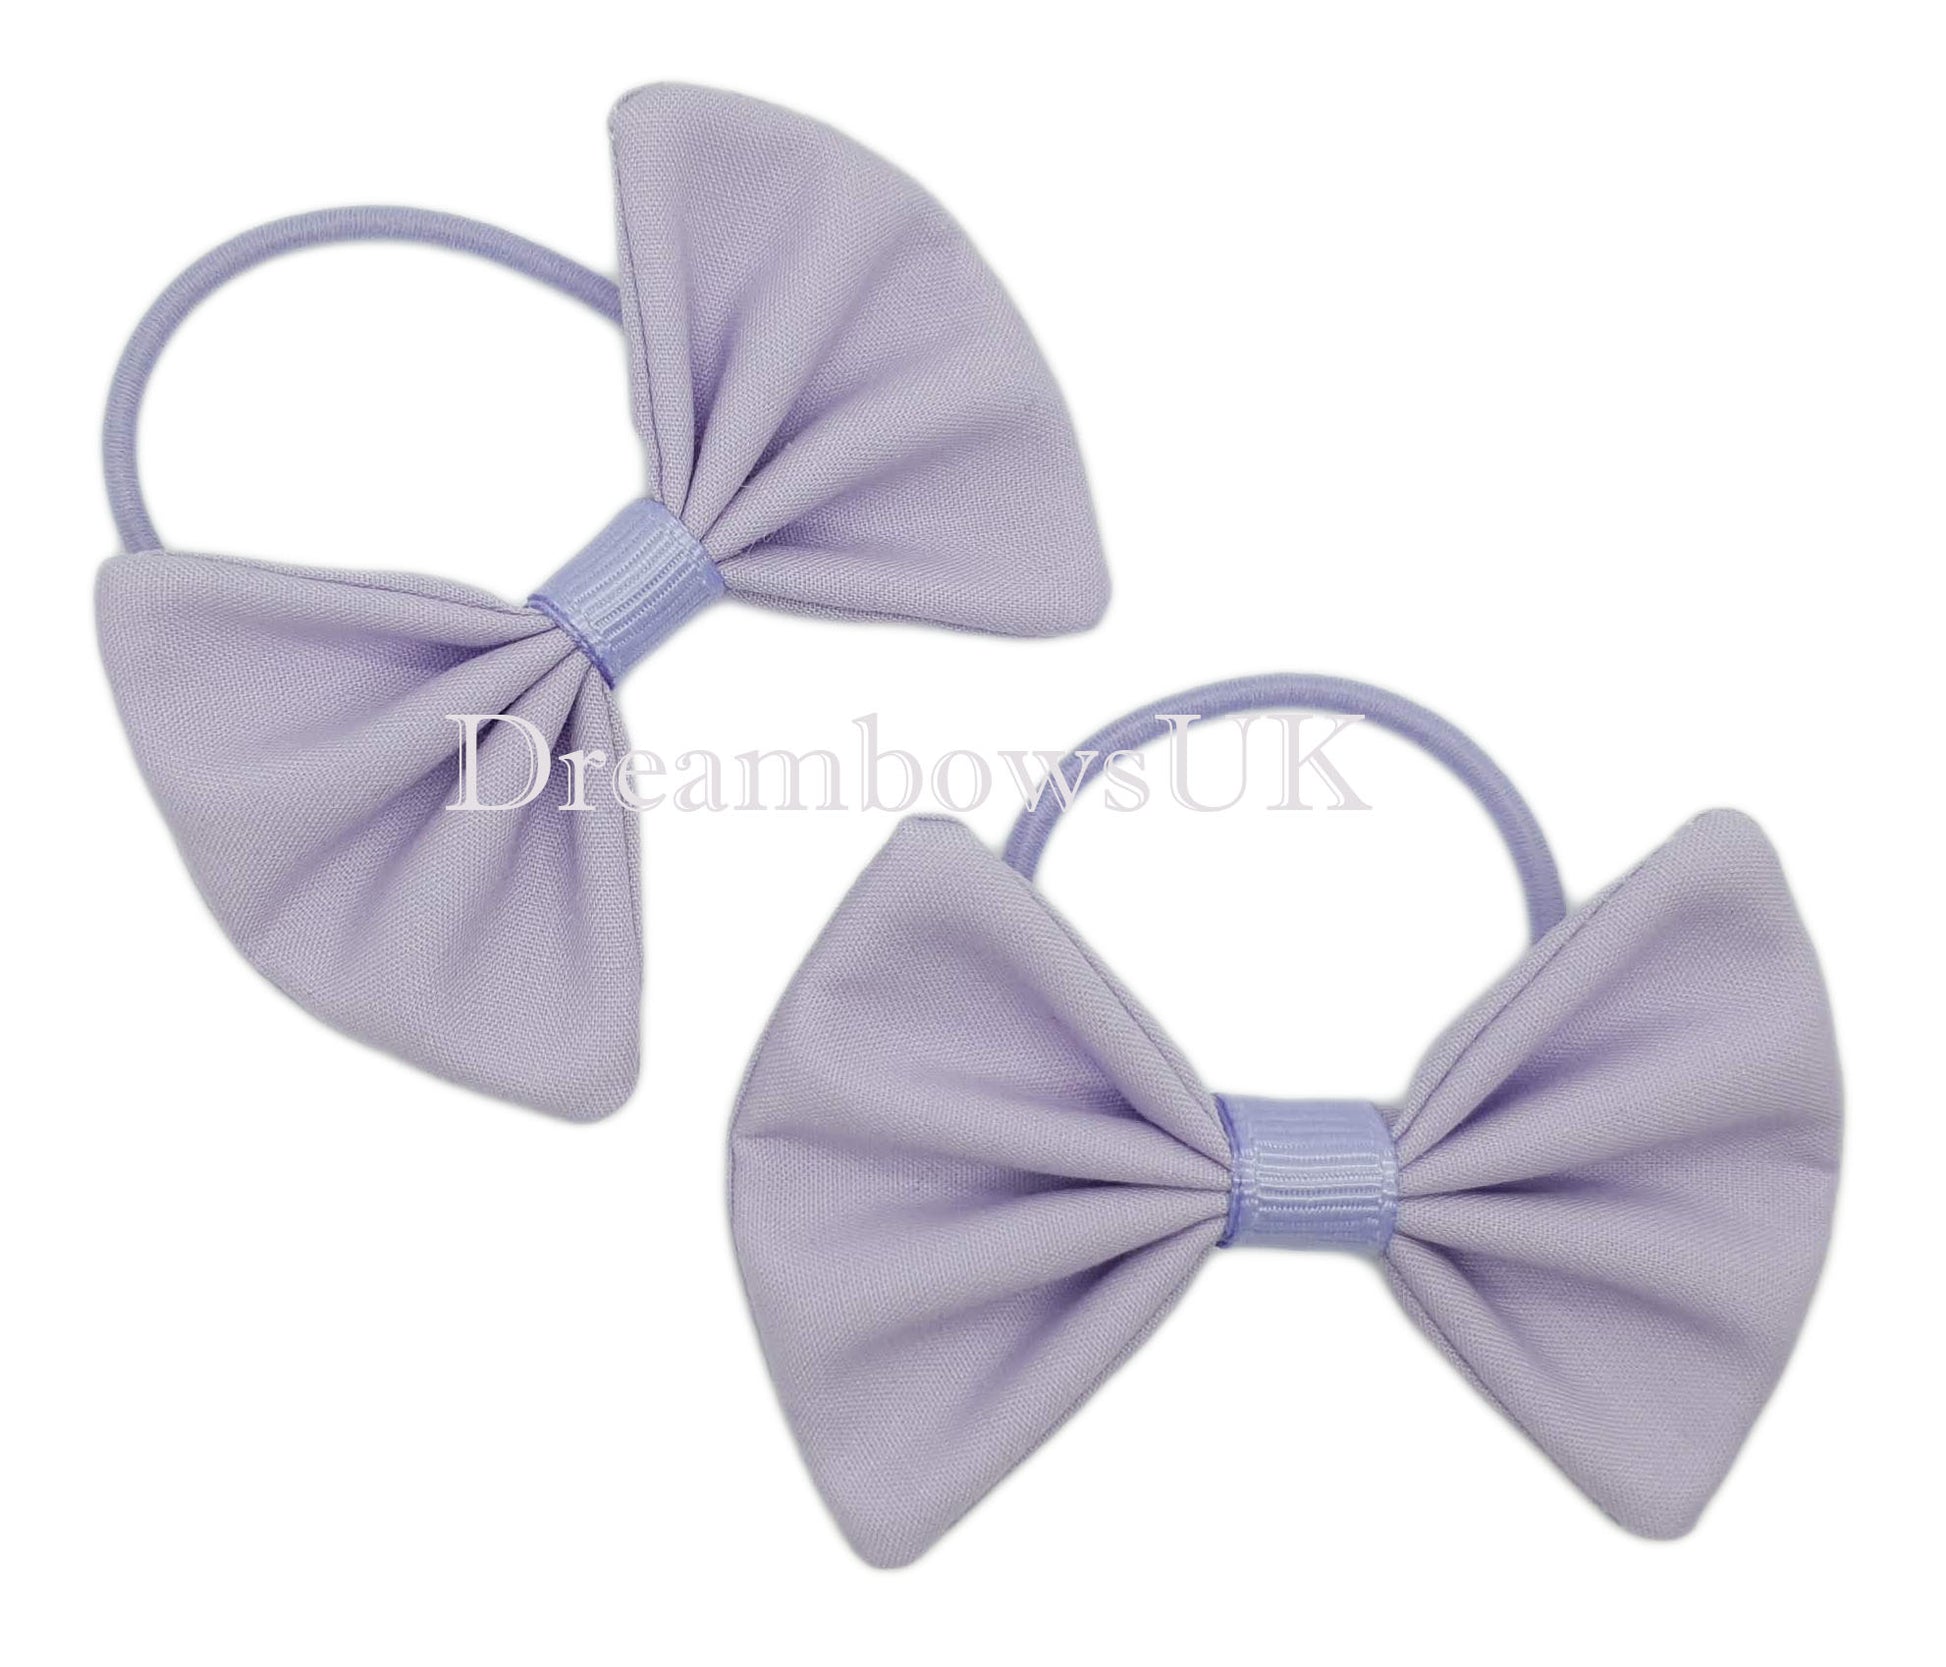 Lilac hair bows on thin bobbles, handmade to order